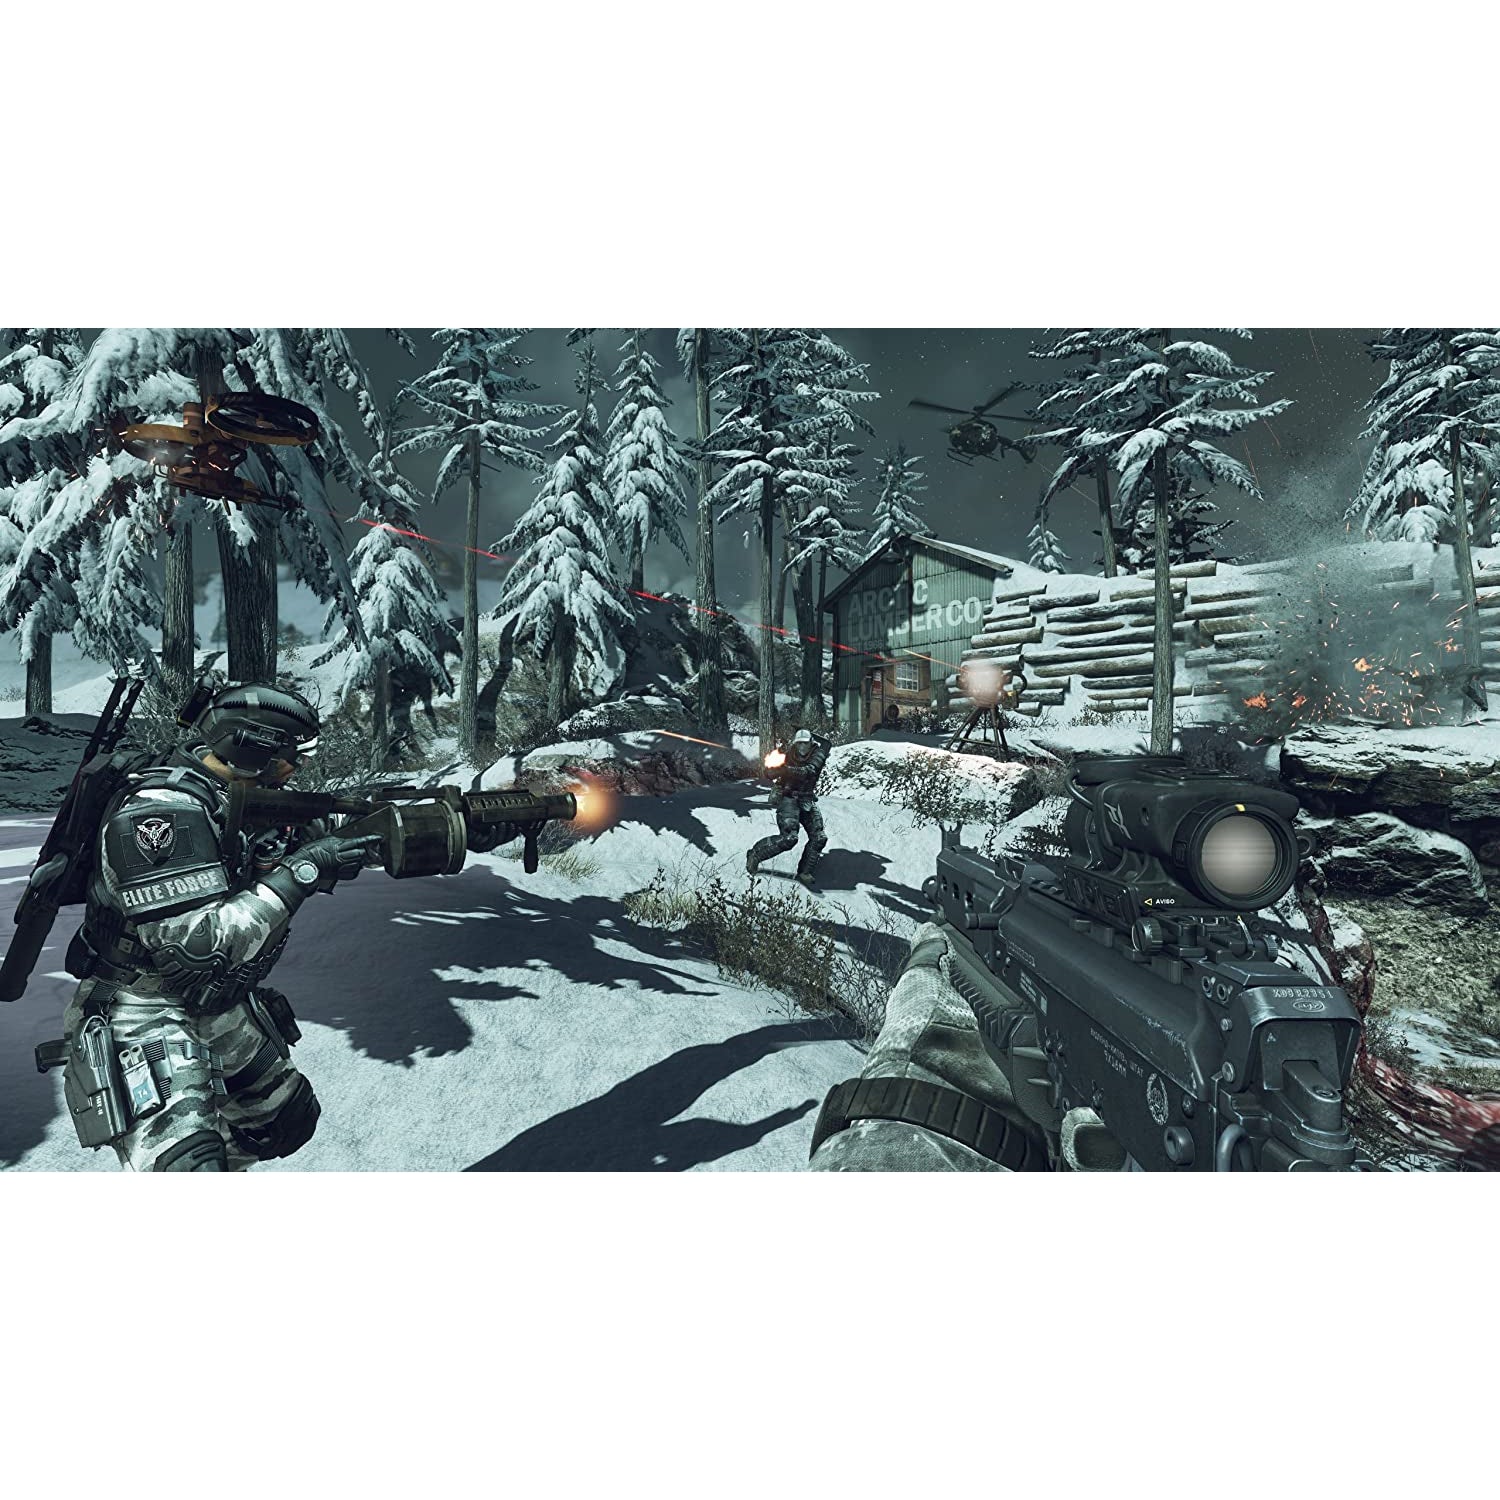 Call of Duty Ghosts (XBOX 360)